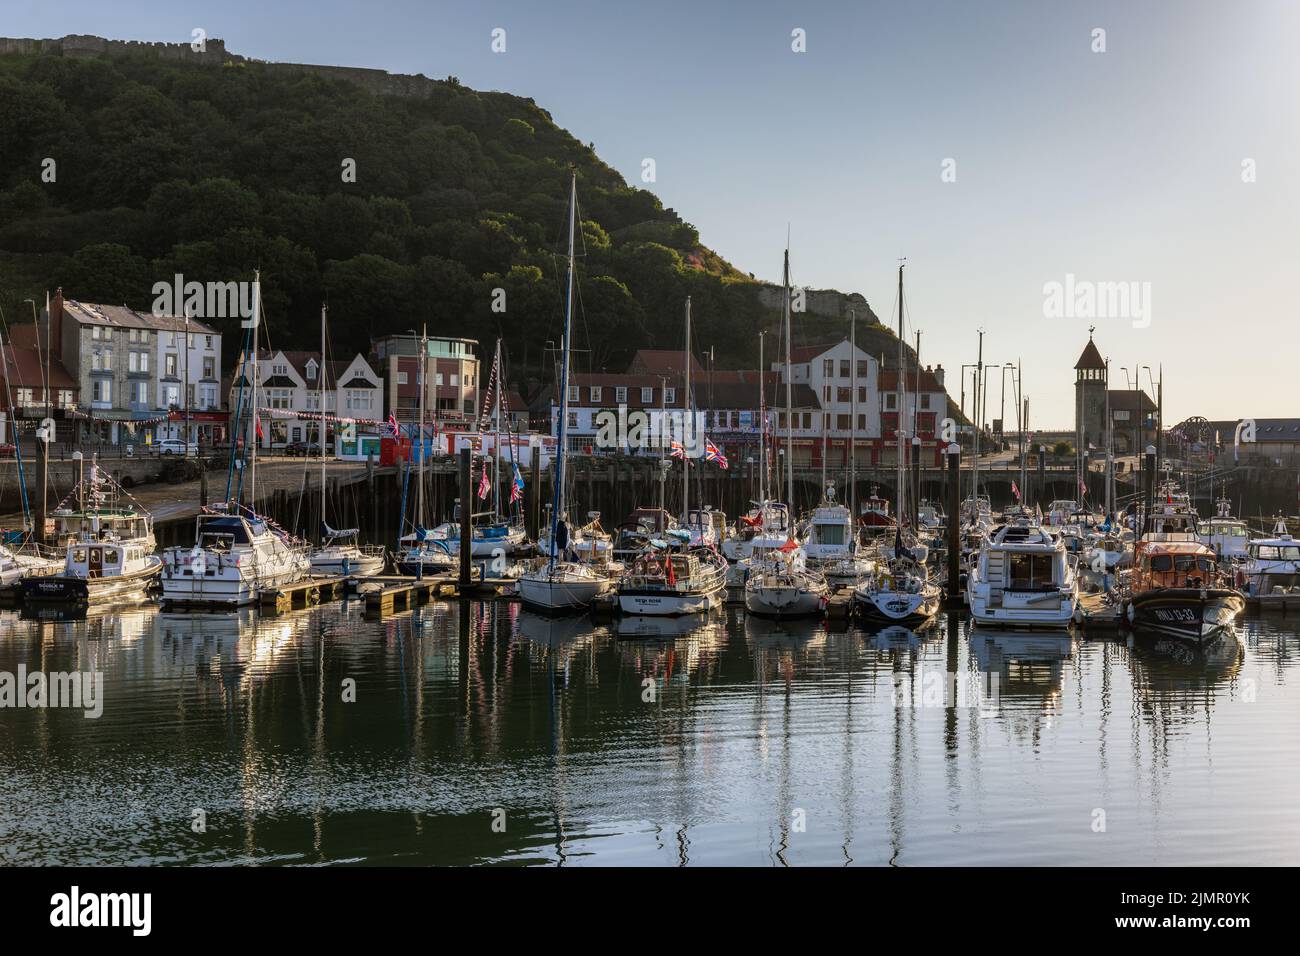 Early morning sun lighting up the boats and yachts moored in Scarborough harbour, with Scarborough Castle in the background. Stock Photo